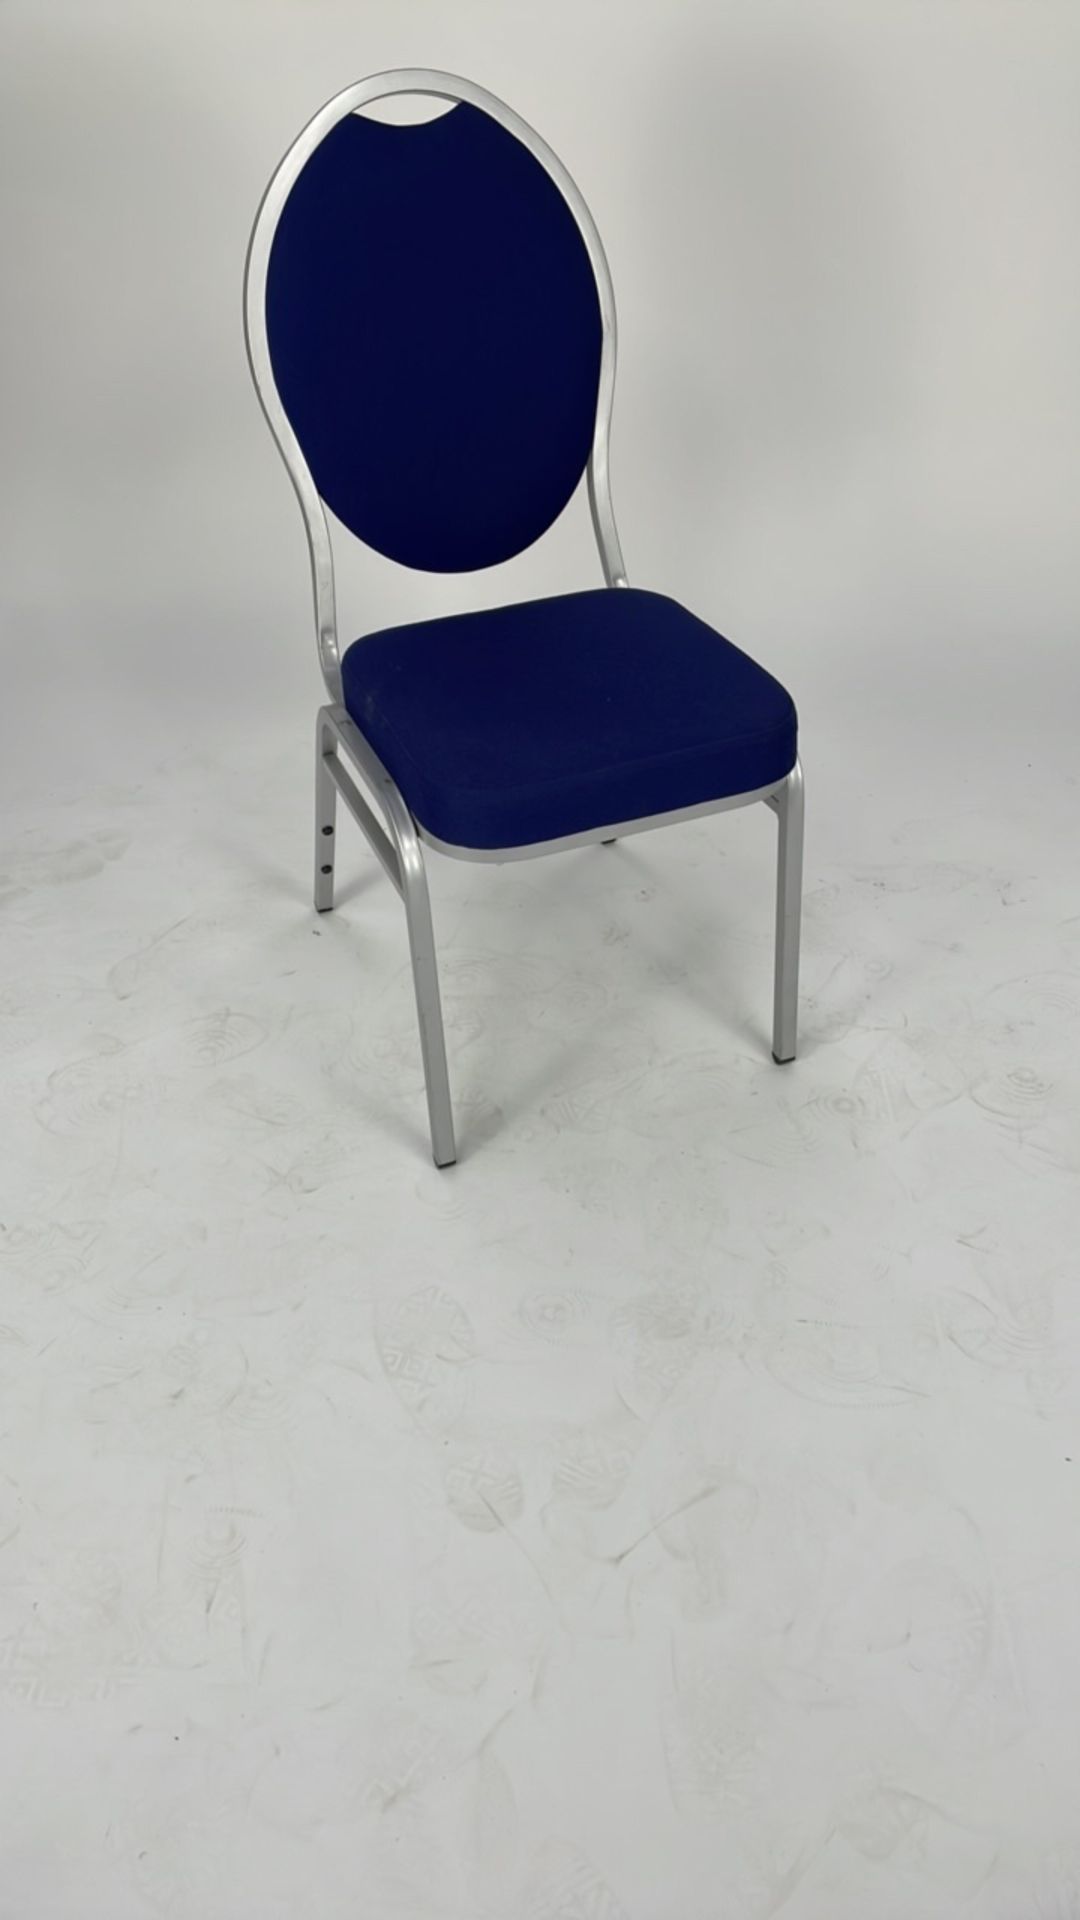 Dining chair blue - Image 2 of 3